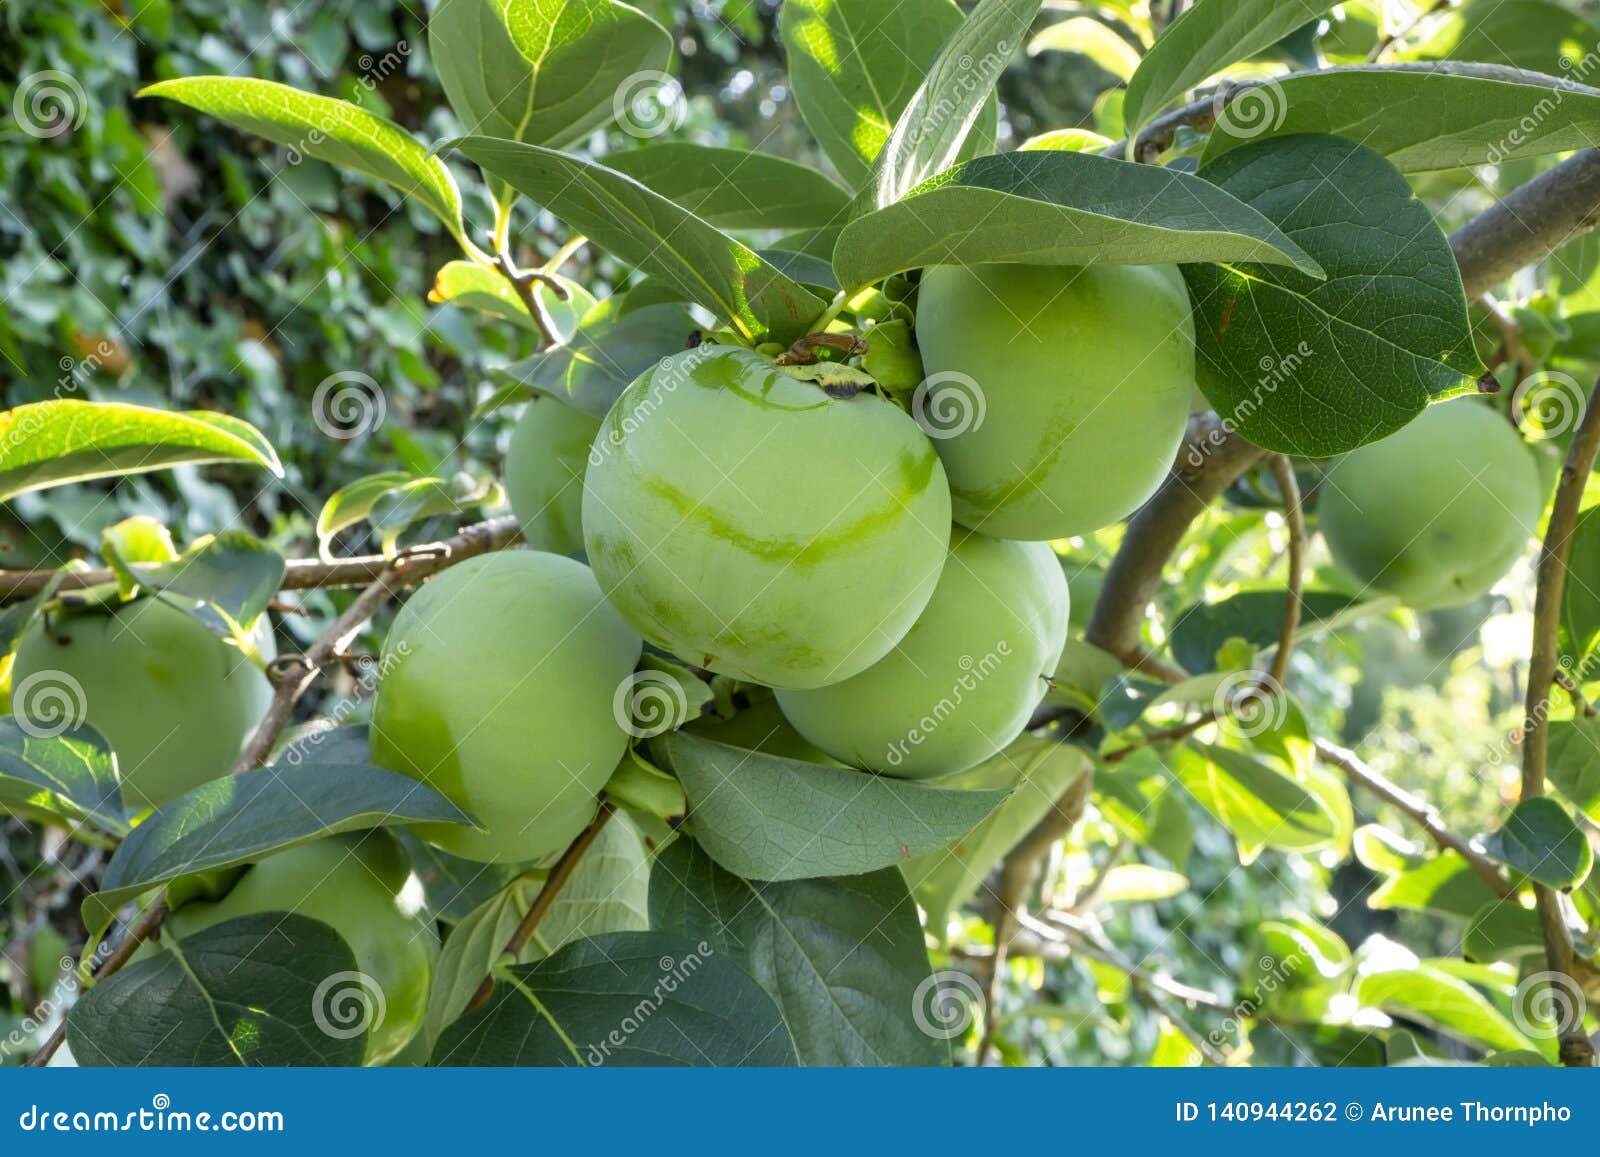 bunches of green raw persimmon round fruits and green leaves, kown as diospyros fruit, they are edible plant